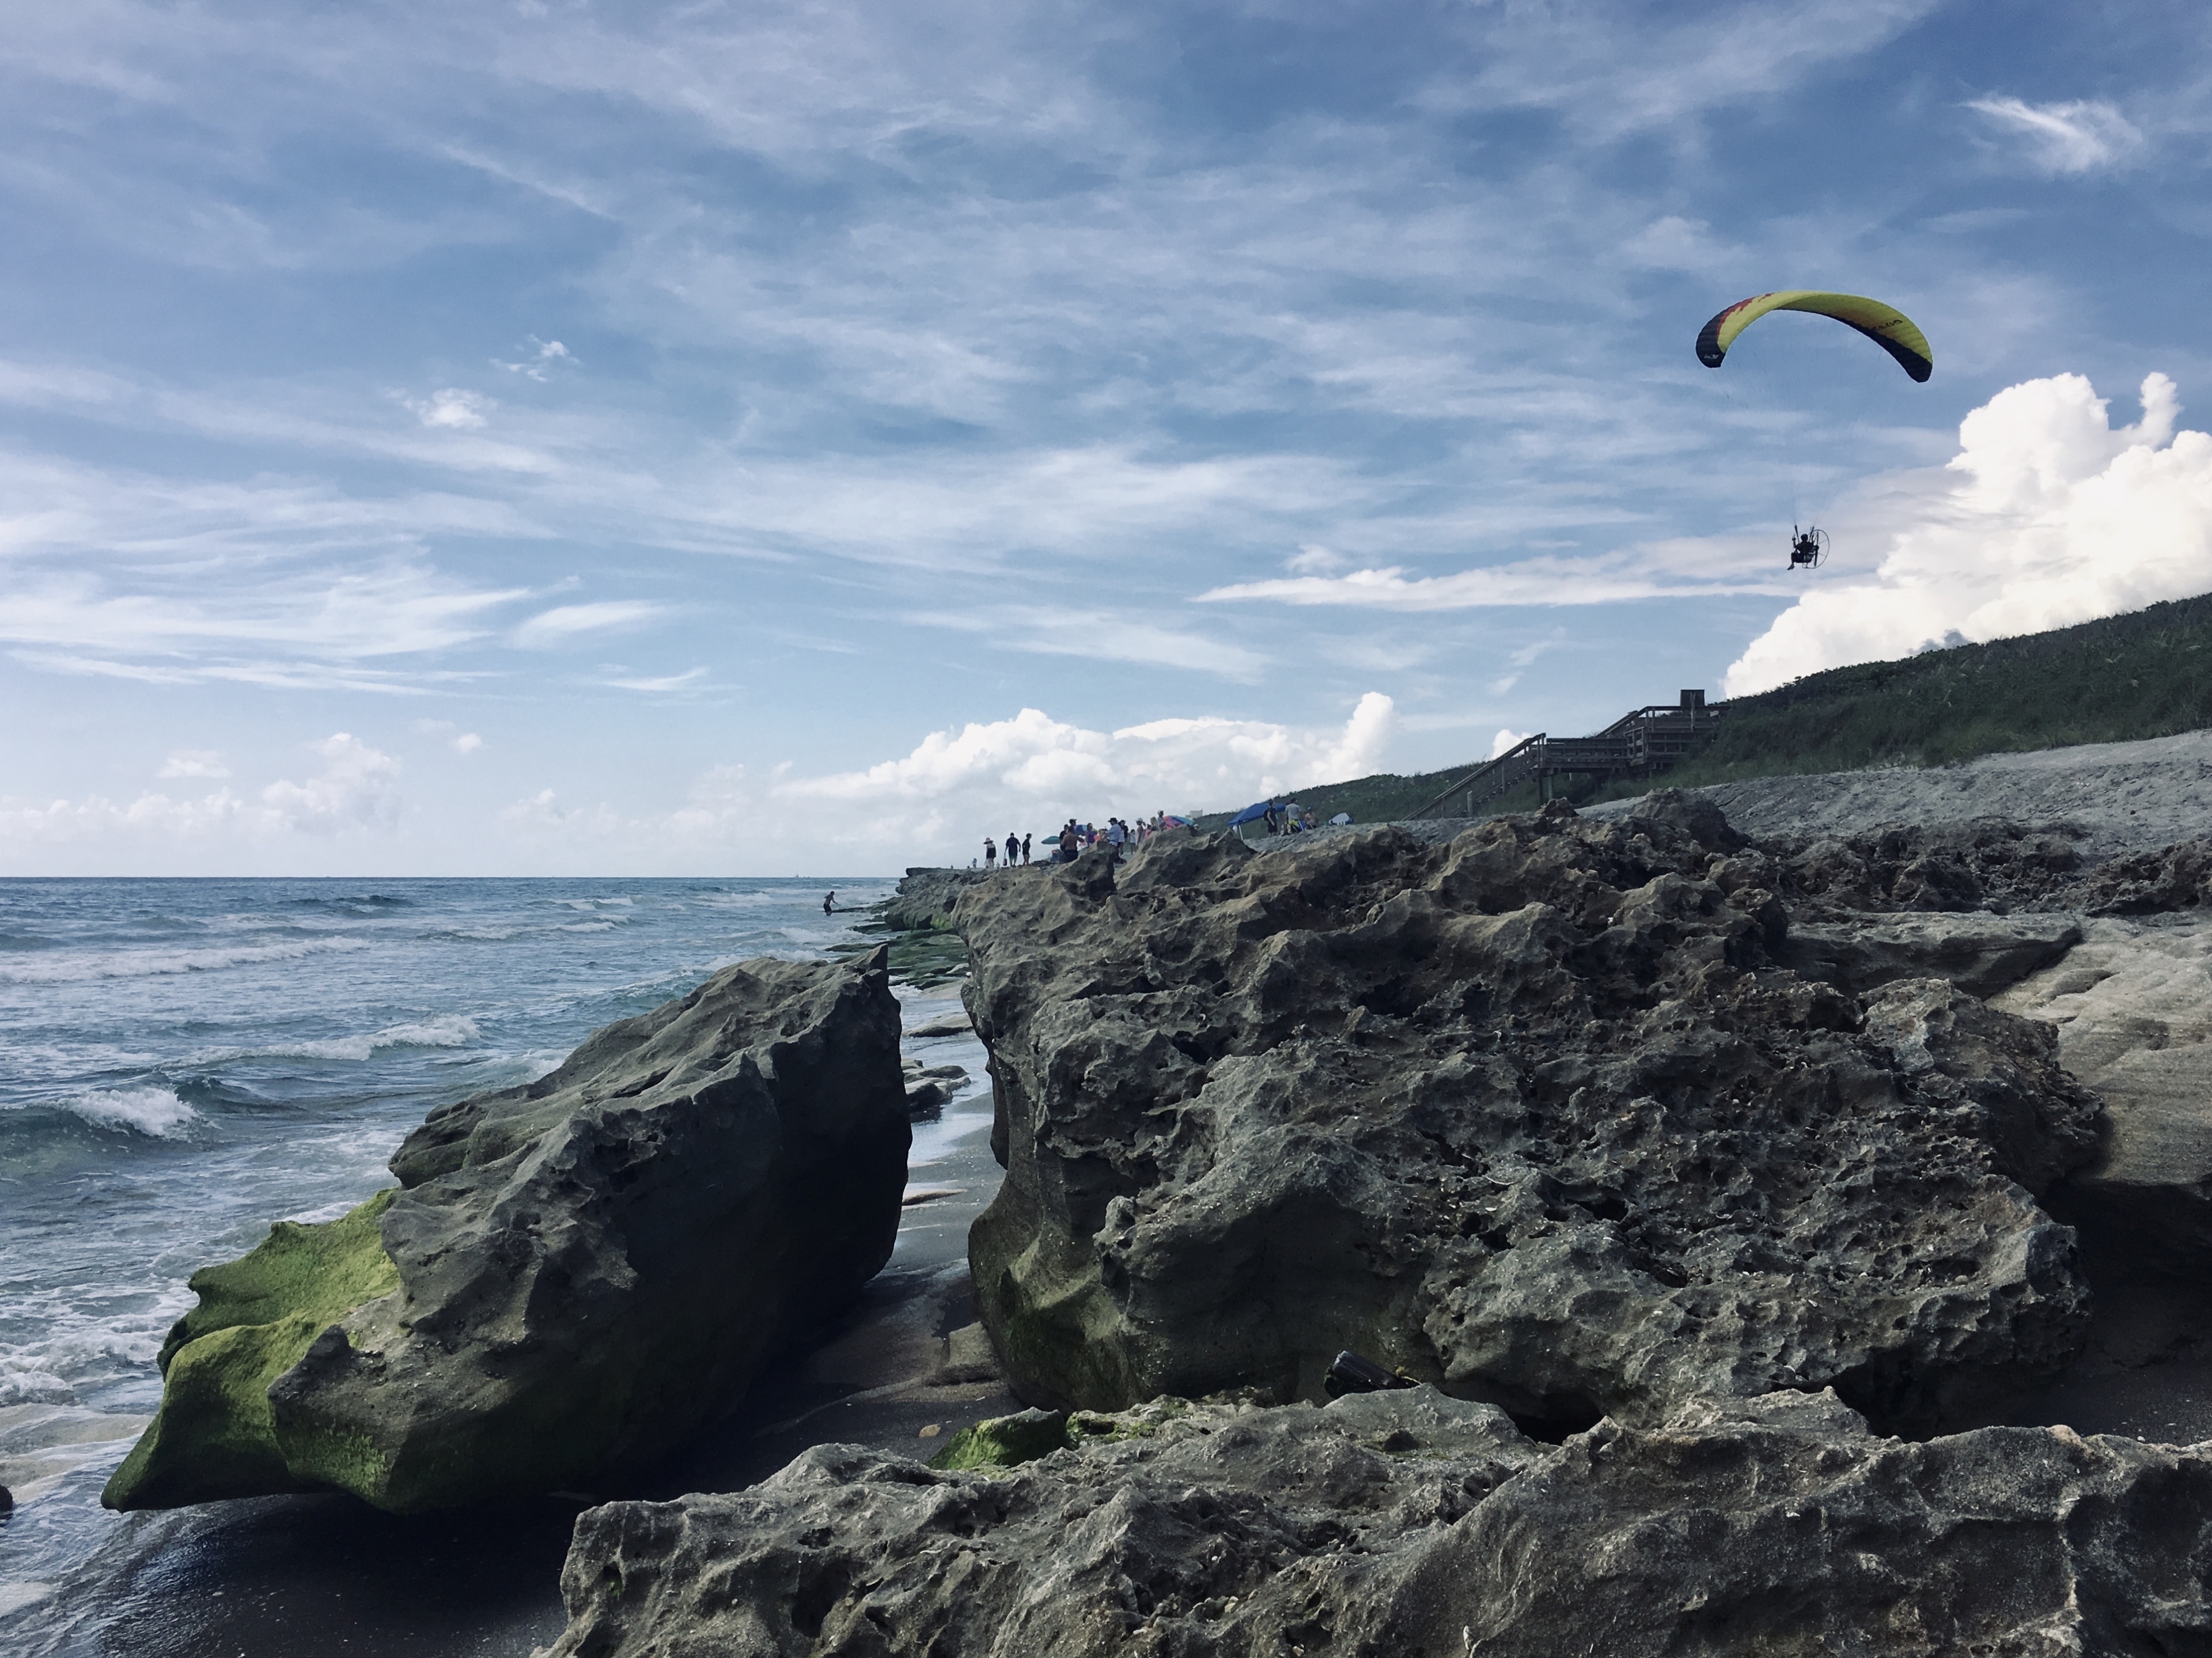 Blowing Rocks Preserve is an environmental preserve on Jupiter Island in Hobe Sound. It contains the largest Anastasia limestone outcropping on the state's east coast. Not often we get to see rocky outcrops on Florida beaches and the powered parachute was the icing on the cake...